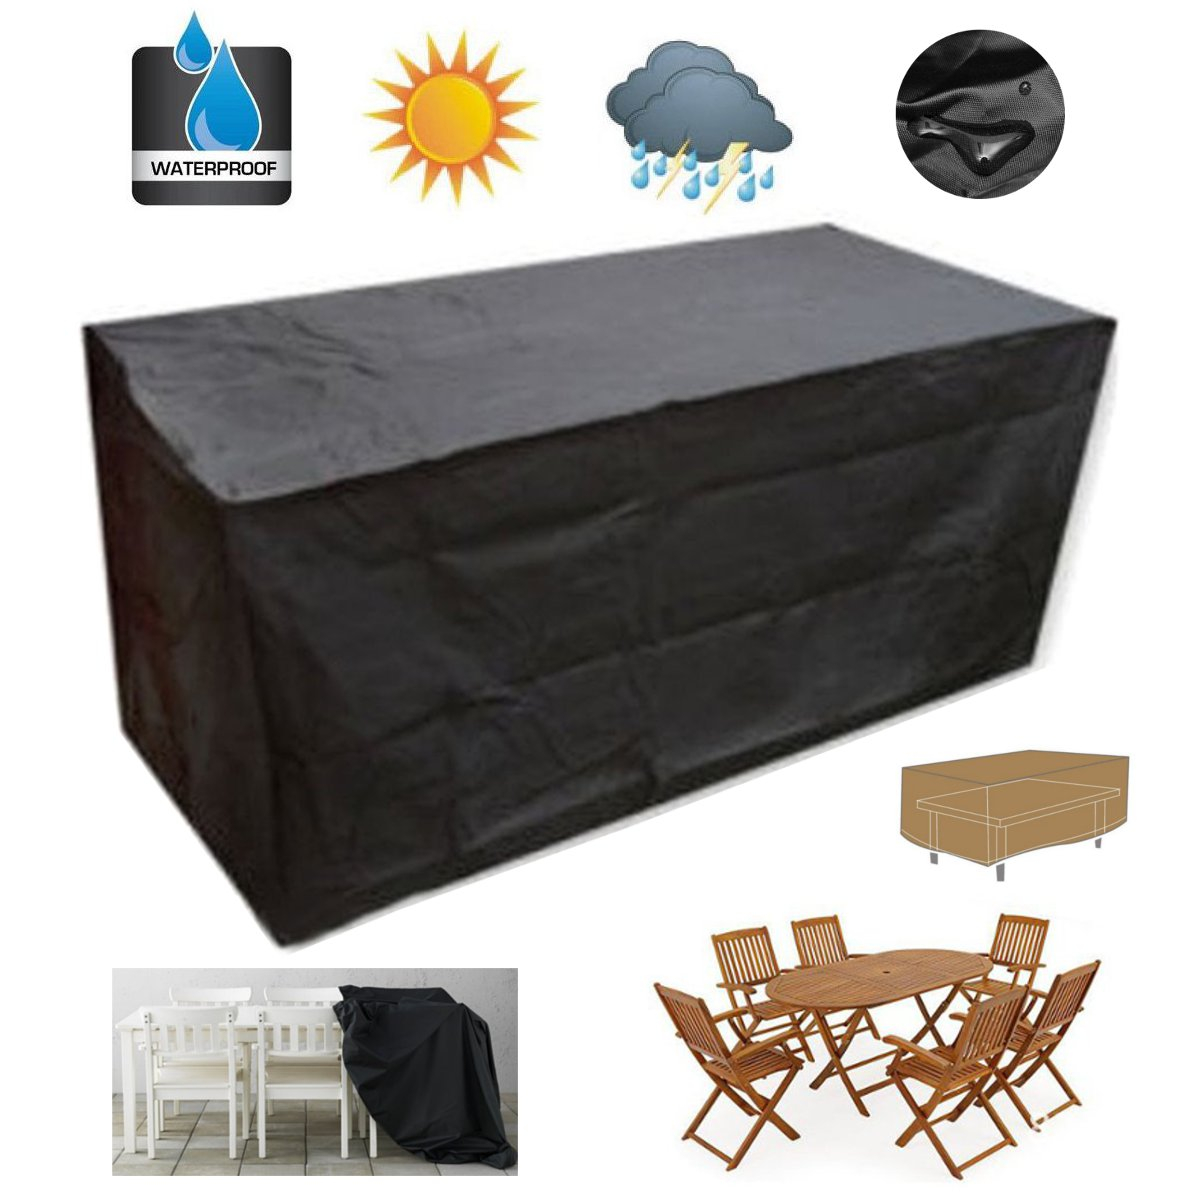 Us 1584 52 Off18012074cm Garden Patio Chair Outdoor Furniture Sofa Cover Waterproof Polyester Pvc Coated Table Desk Black Silver Color In Sofa inside proportions 1200 X 1200